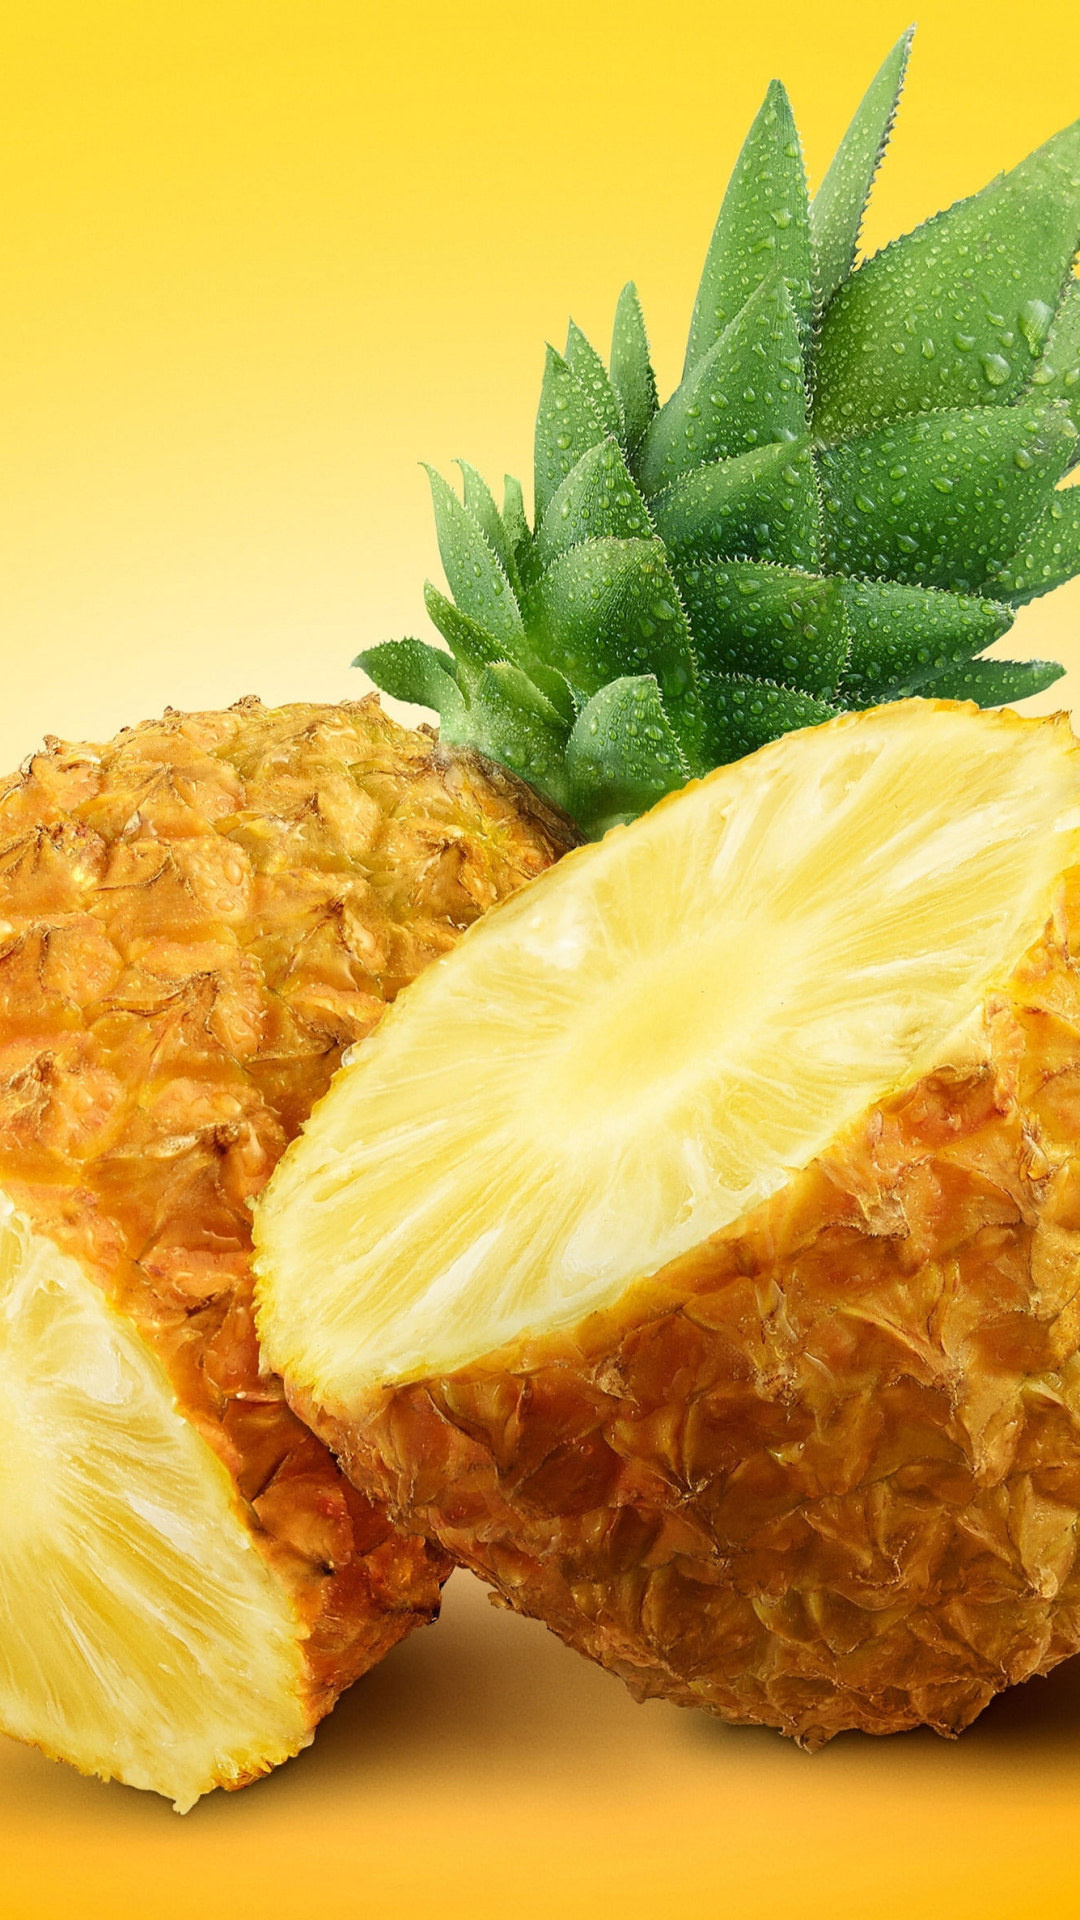 Pineapple: An indigenous fruit to South America, The centerpiece at dinner parties. 1080x1920 Full HD Background.